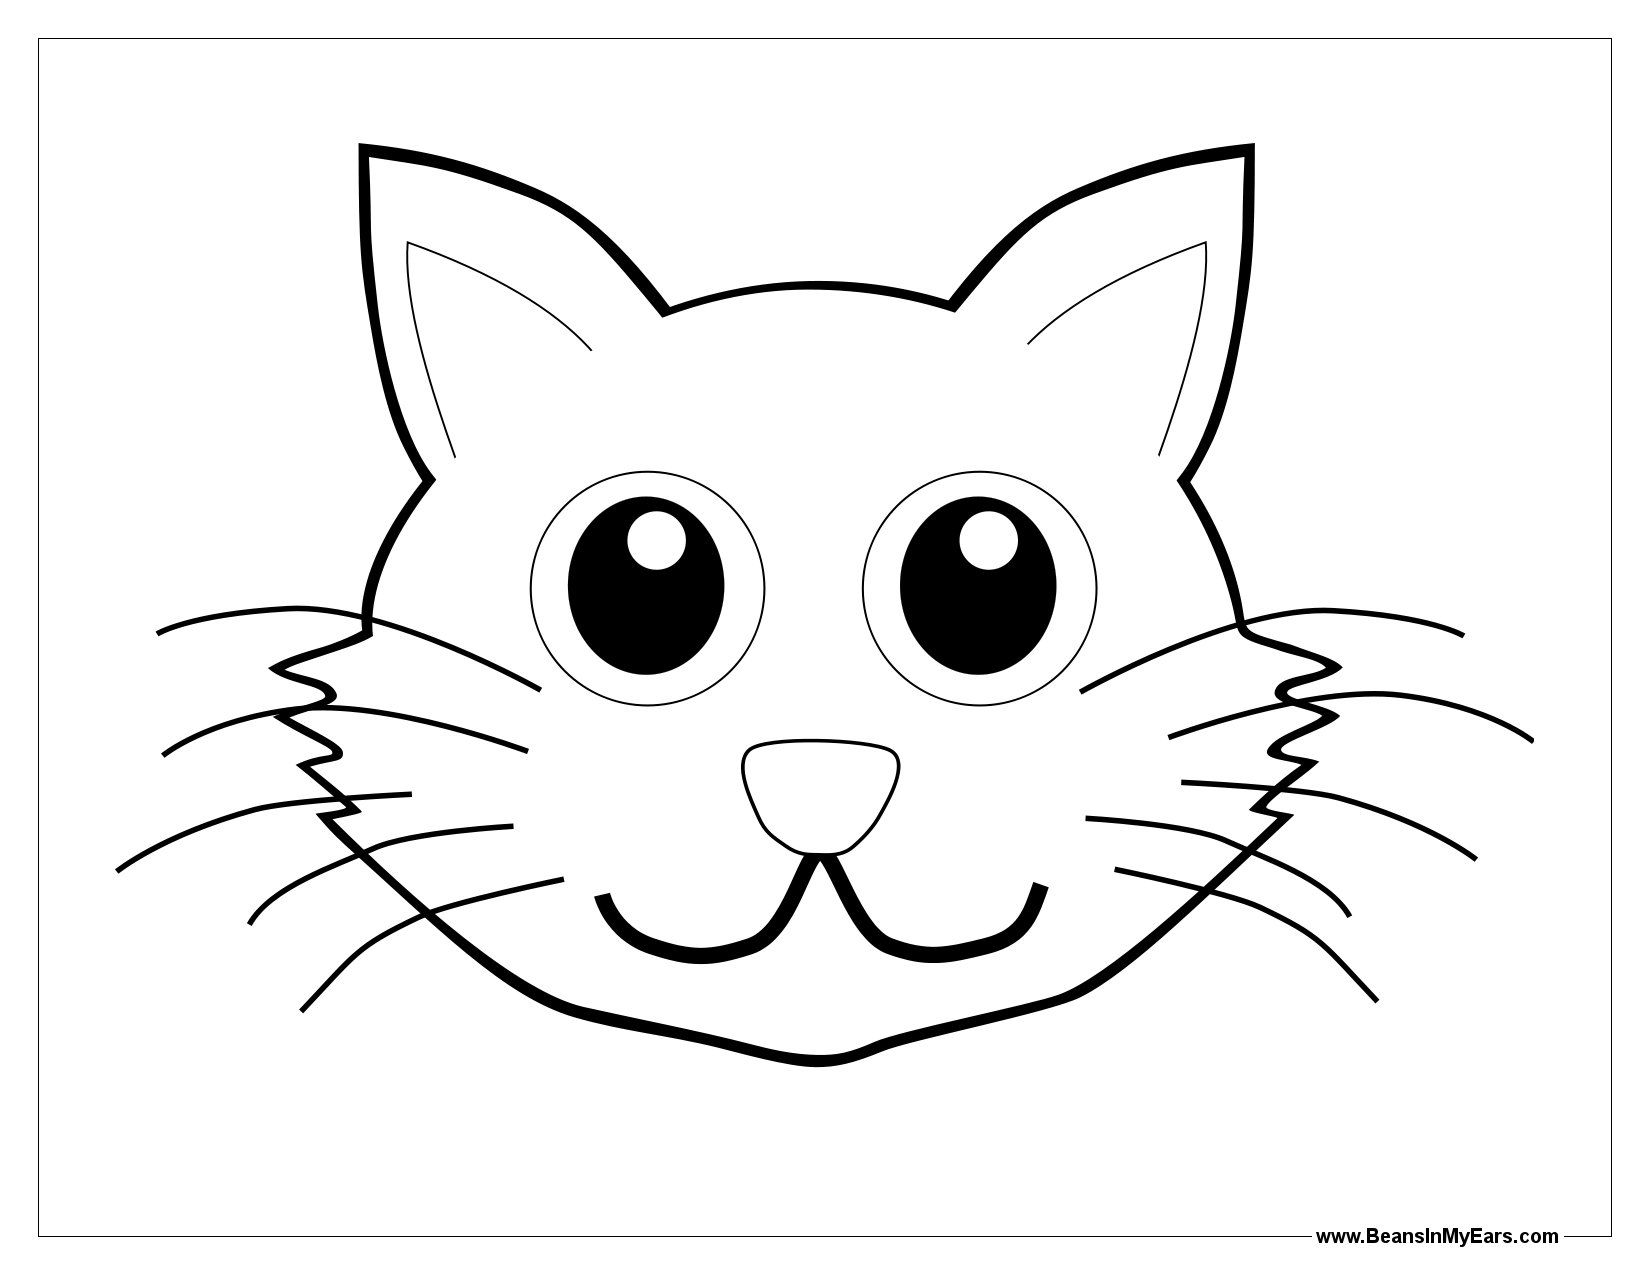 Animal Faces Coloring Pages - Coloring Stylizr